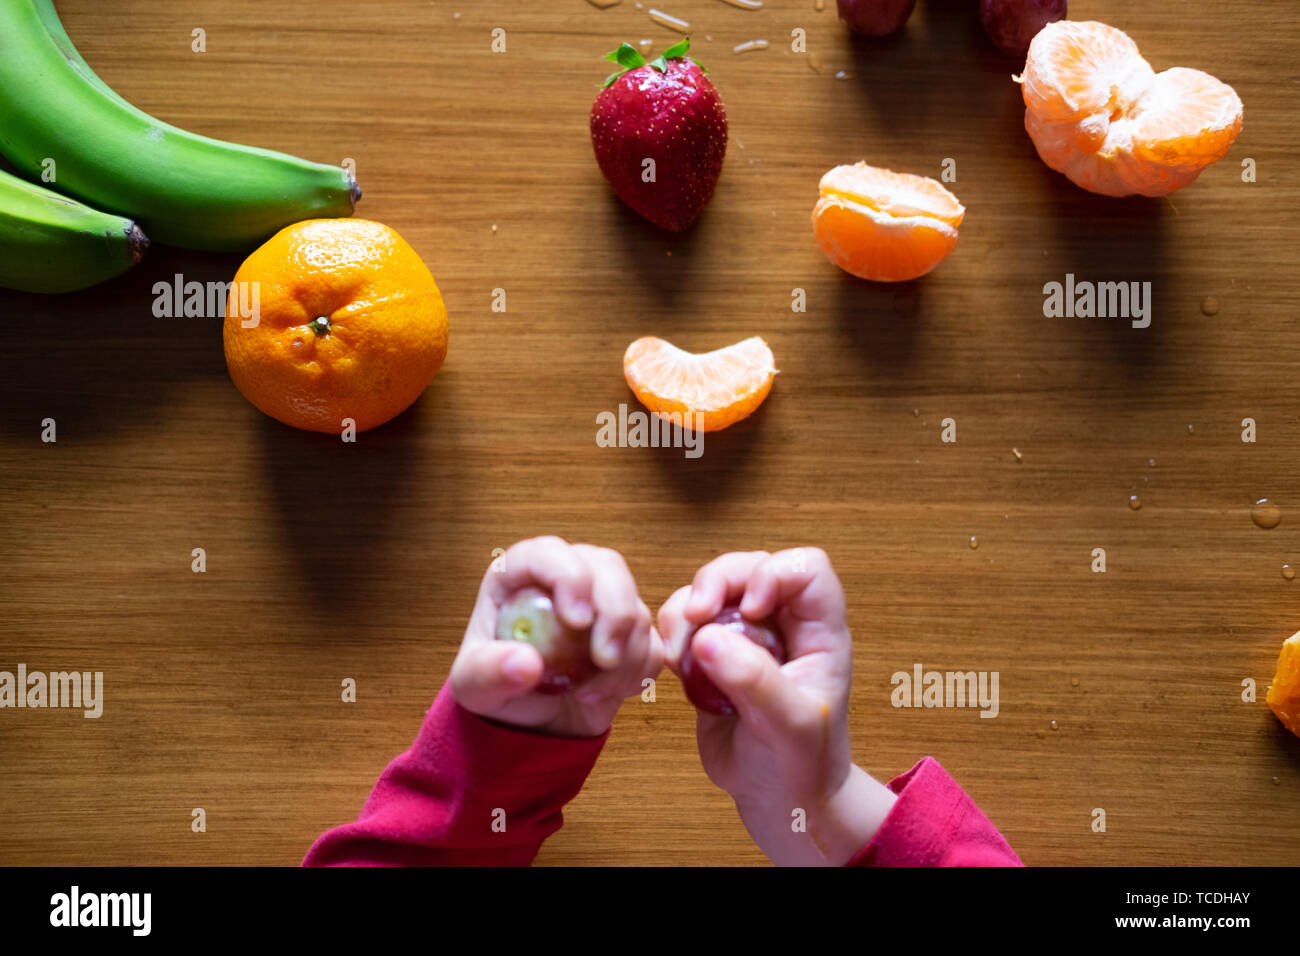 Baby s hand manipulating different fruits on a wooden table Stock Photo